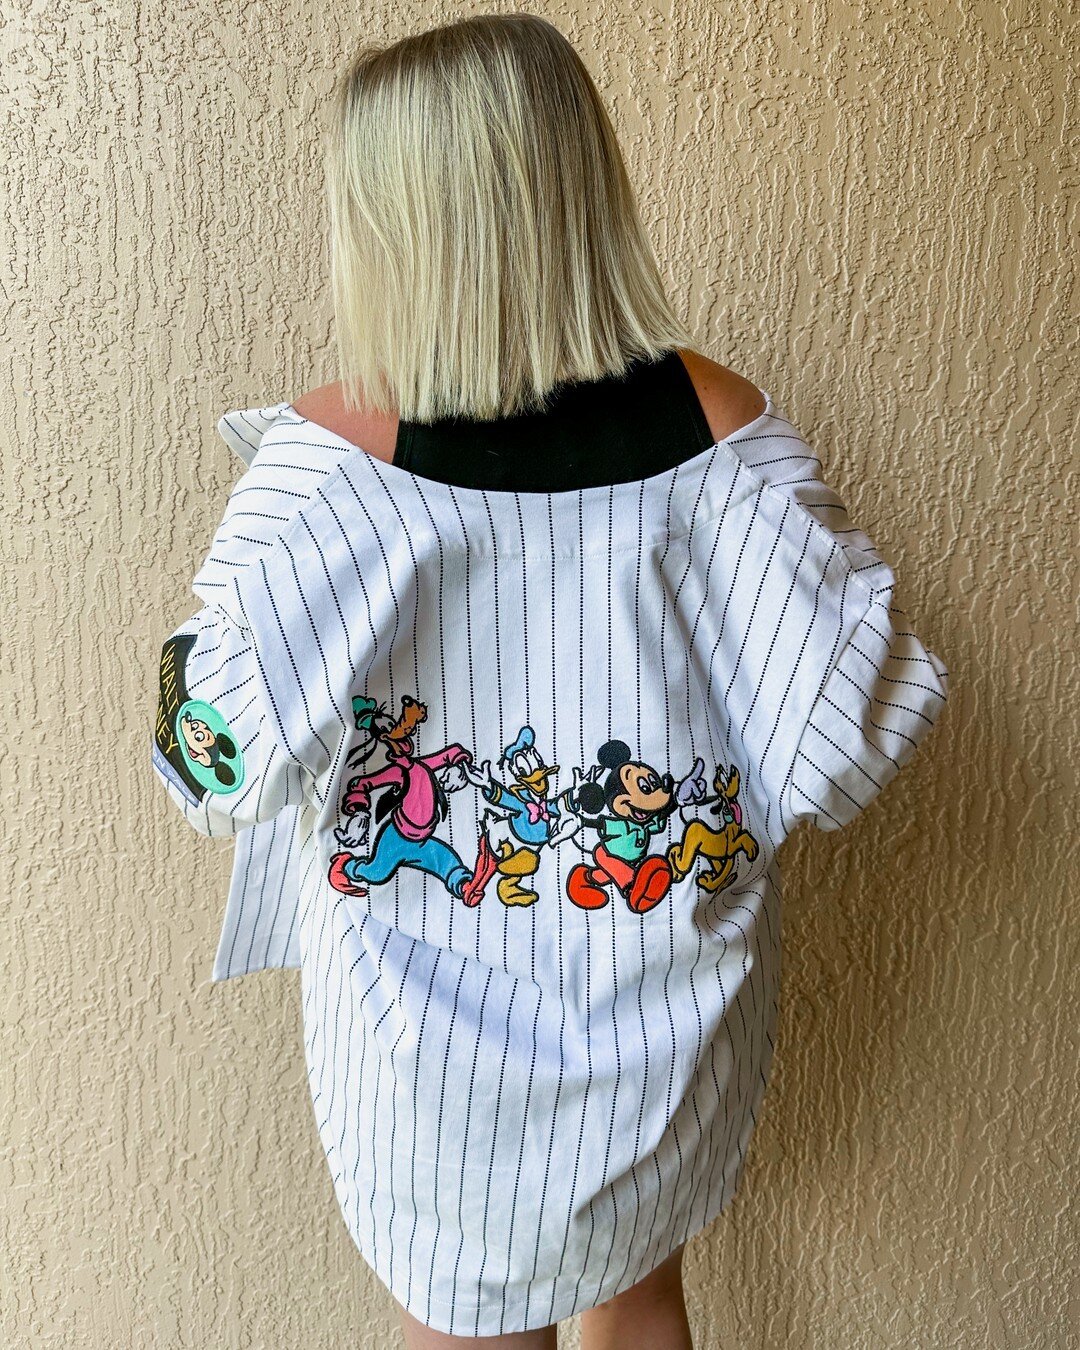 Sharing a couple of Disney finds today in stories! I wore this baseball jersey the other day to watch Fantastic for the first time at Hollywood Studios ✨🎥 I thought the show was so cute! Have you seen it before?! 😍 You can shop this in my stories o